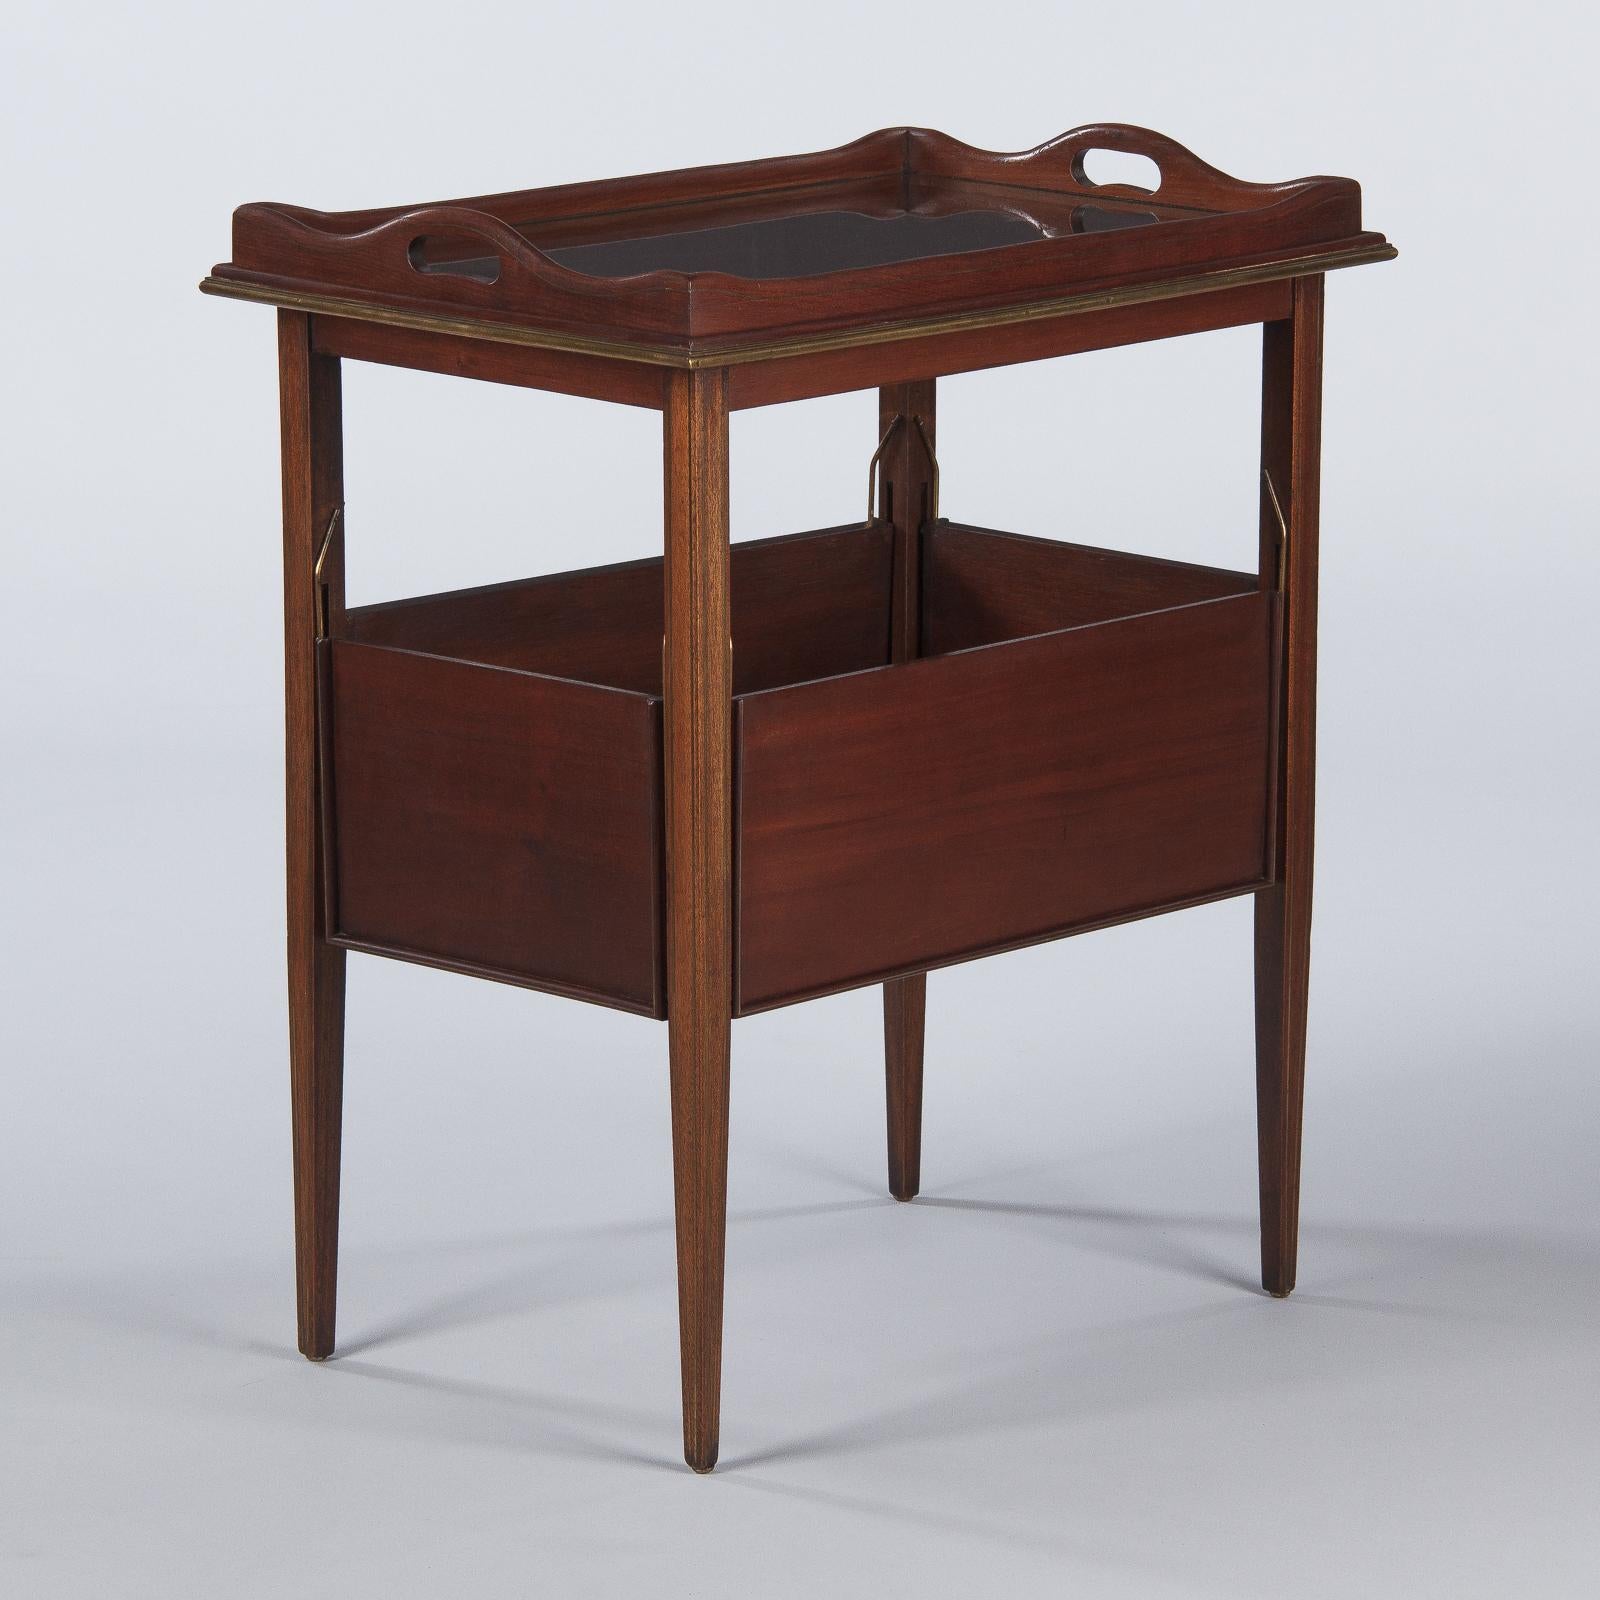 A vintage neoclassical convertible mahogany and rosewood serving table, French, circa 1920. Square tapered legs in mahogany, rosewood tabletop, shelves and tray, all with delicate bands of brass inlay for subtle decoration. The removable tray has